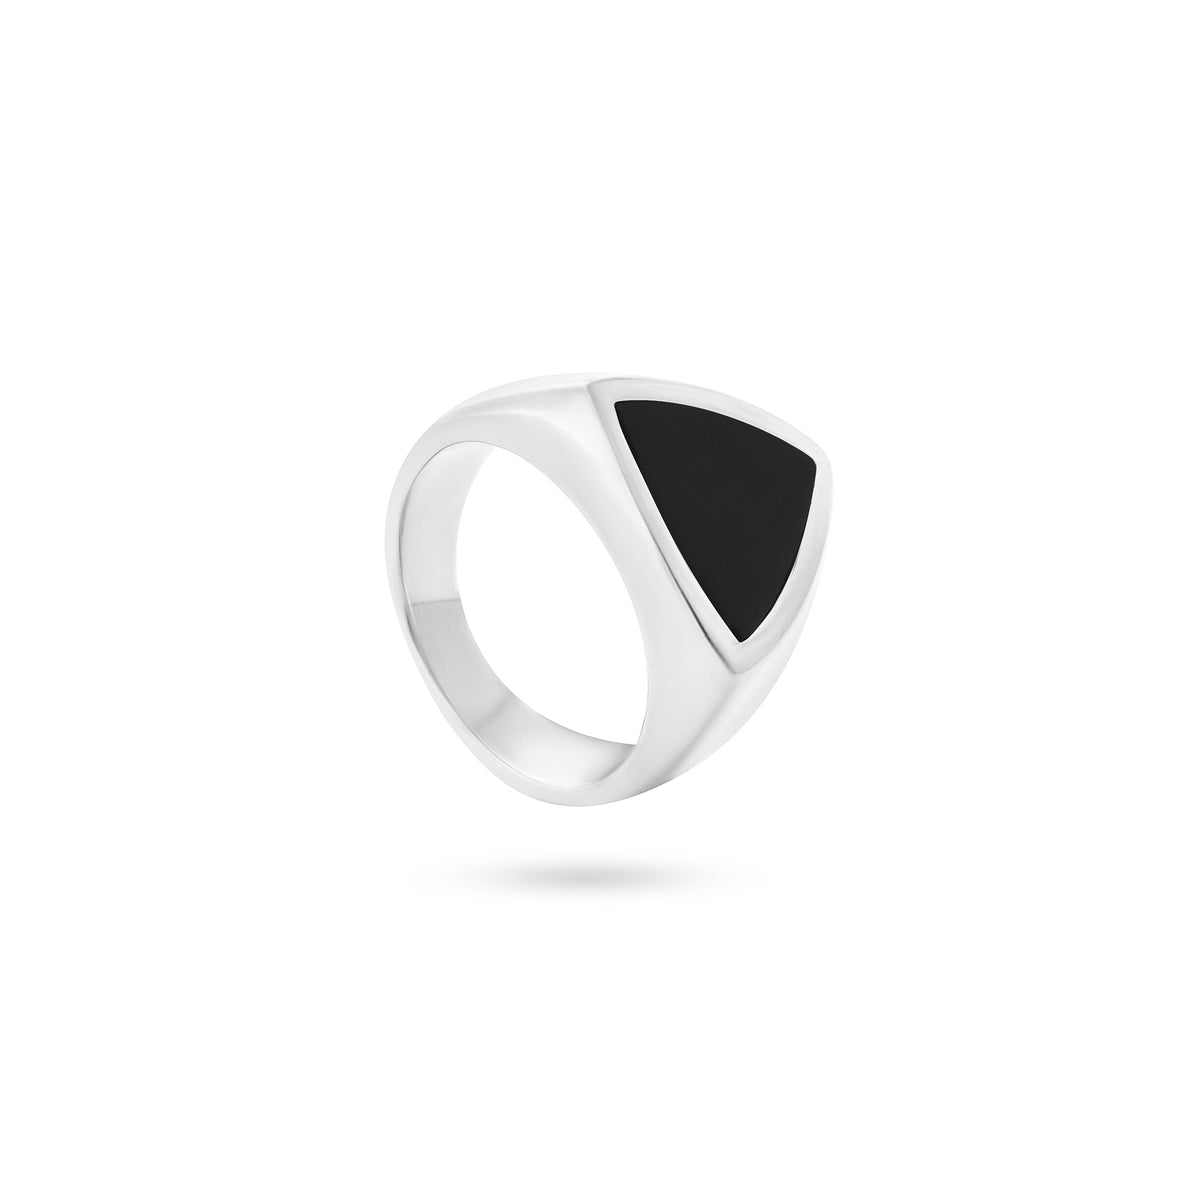 VIKA jewels unisex signet ring with genuine shell recycled sterling silver black color shell handmade bali triangle